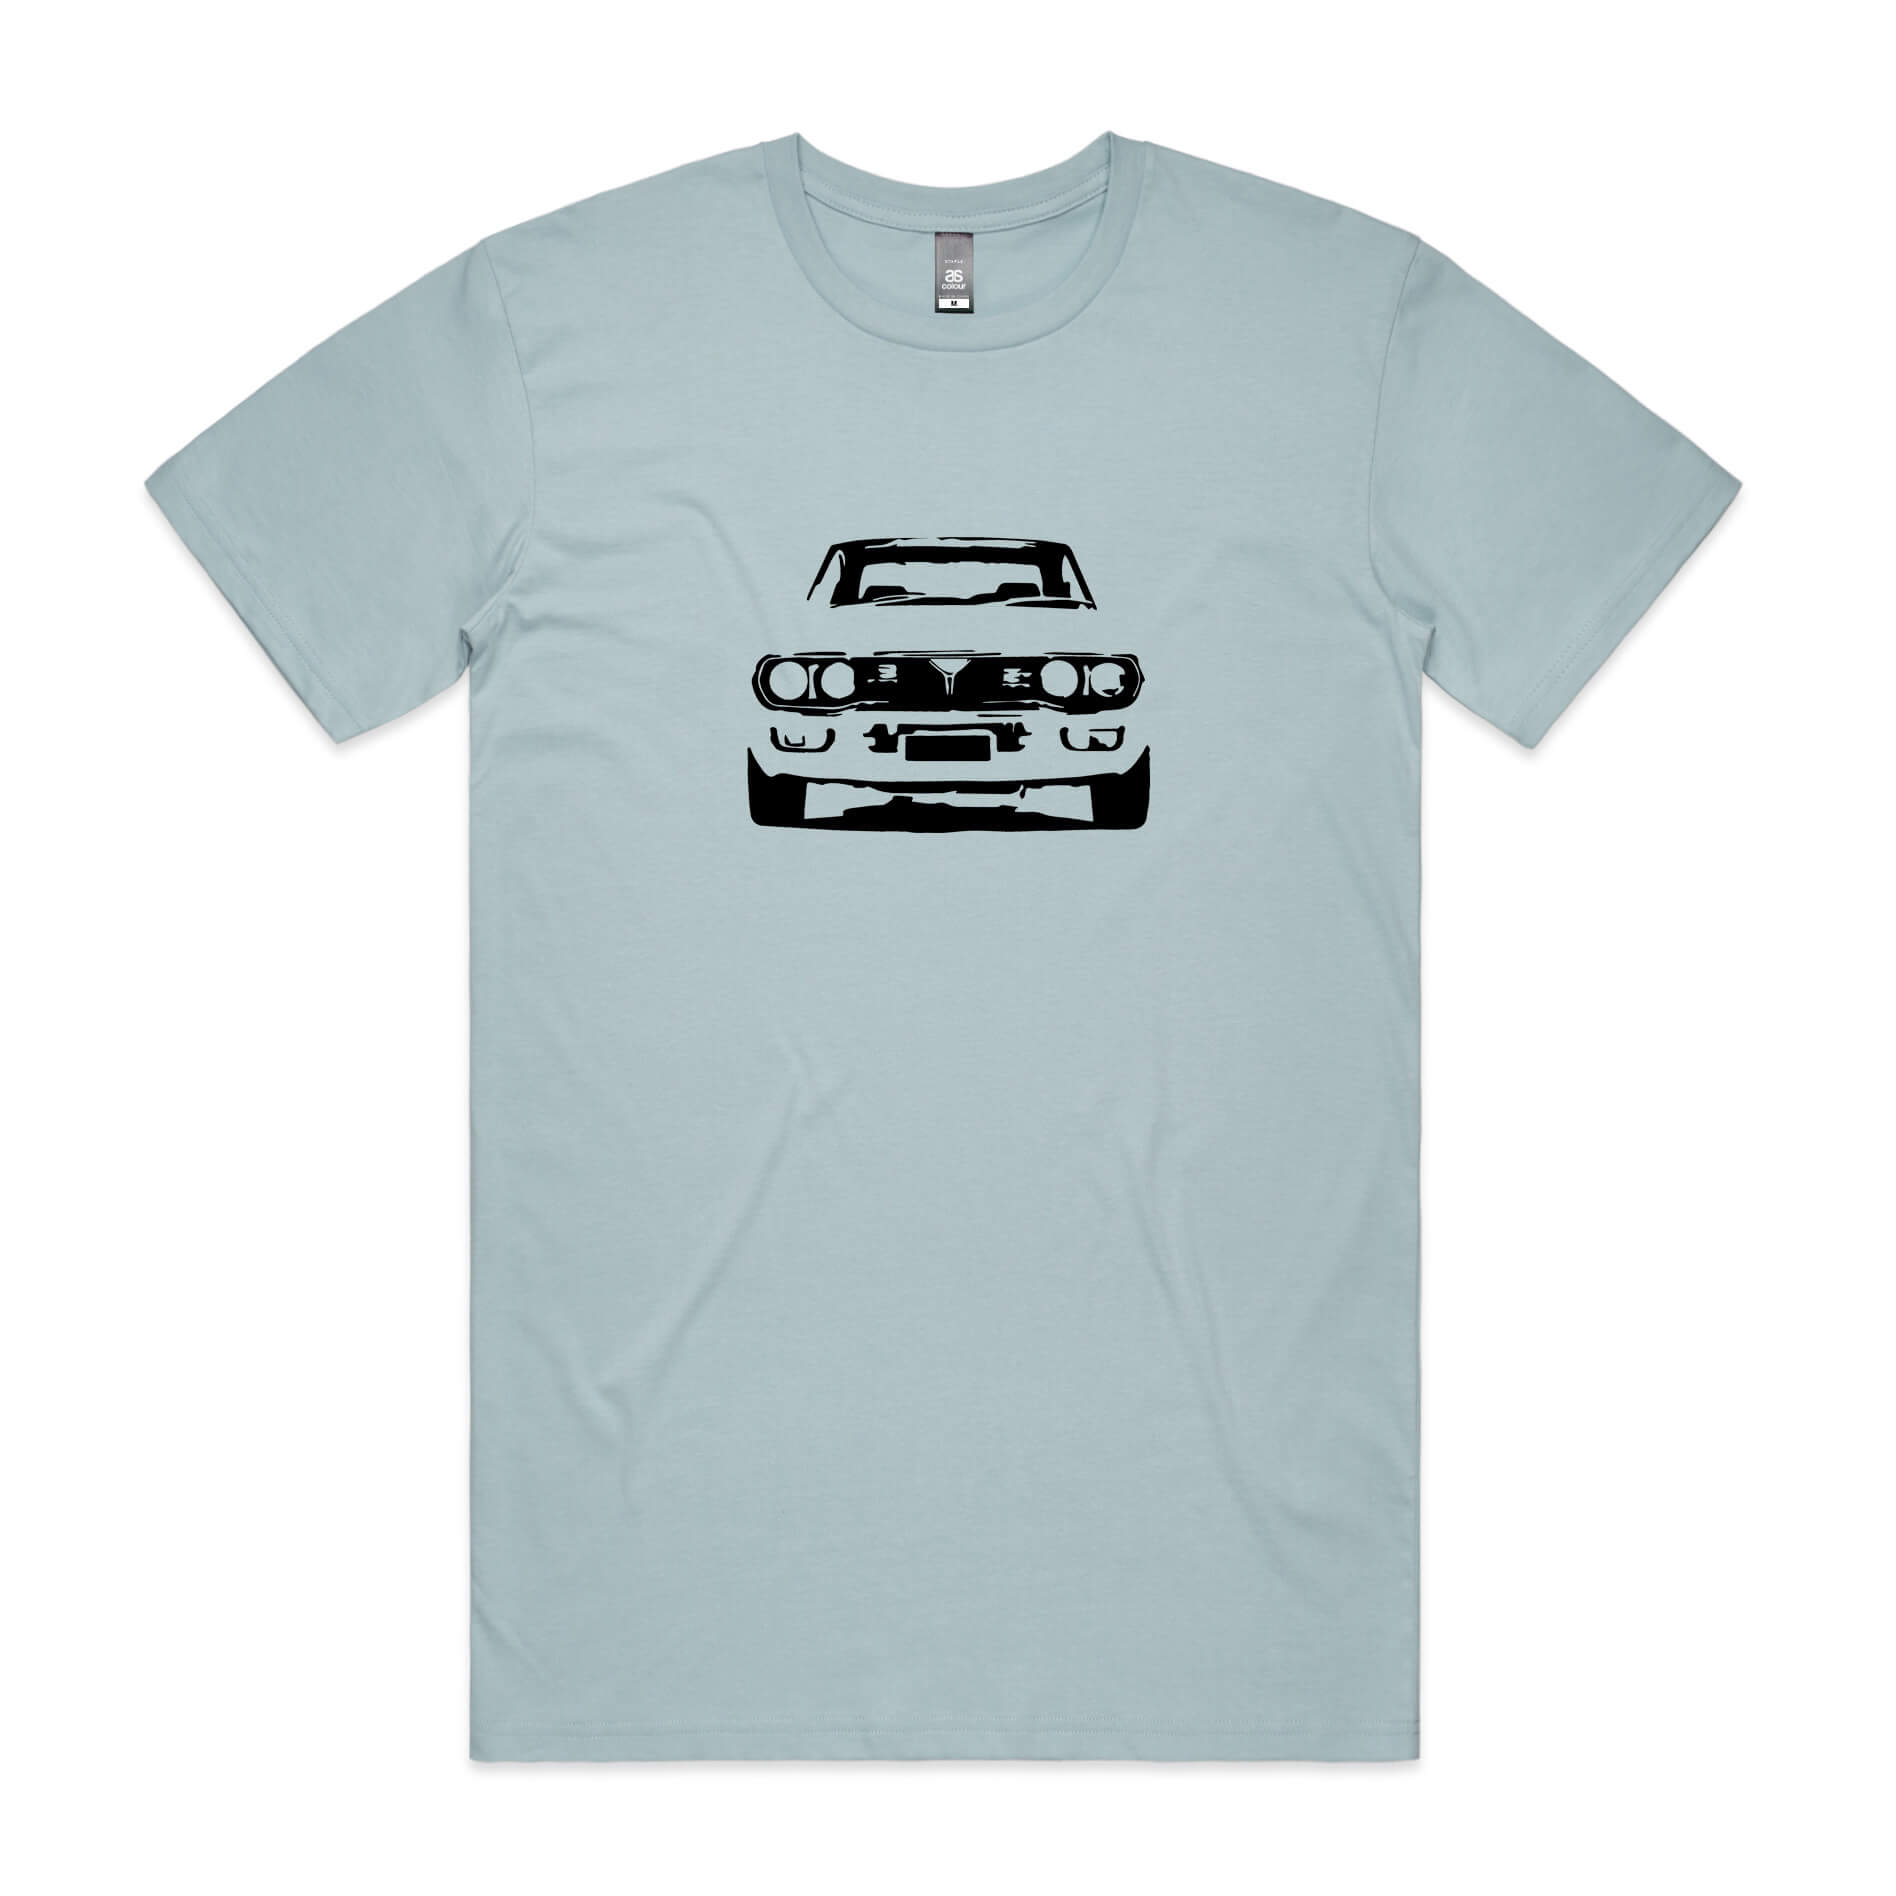 Mazda RX4 t-shirt in light blue with black rotary engine car graphic